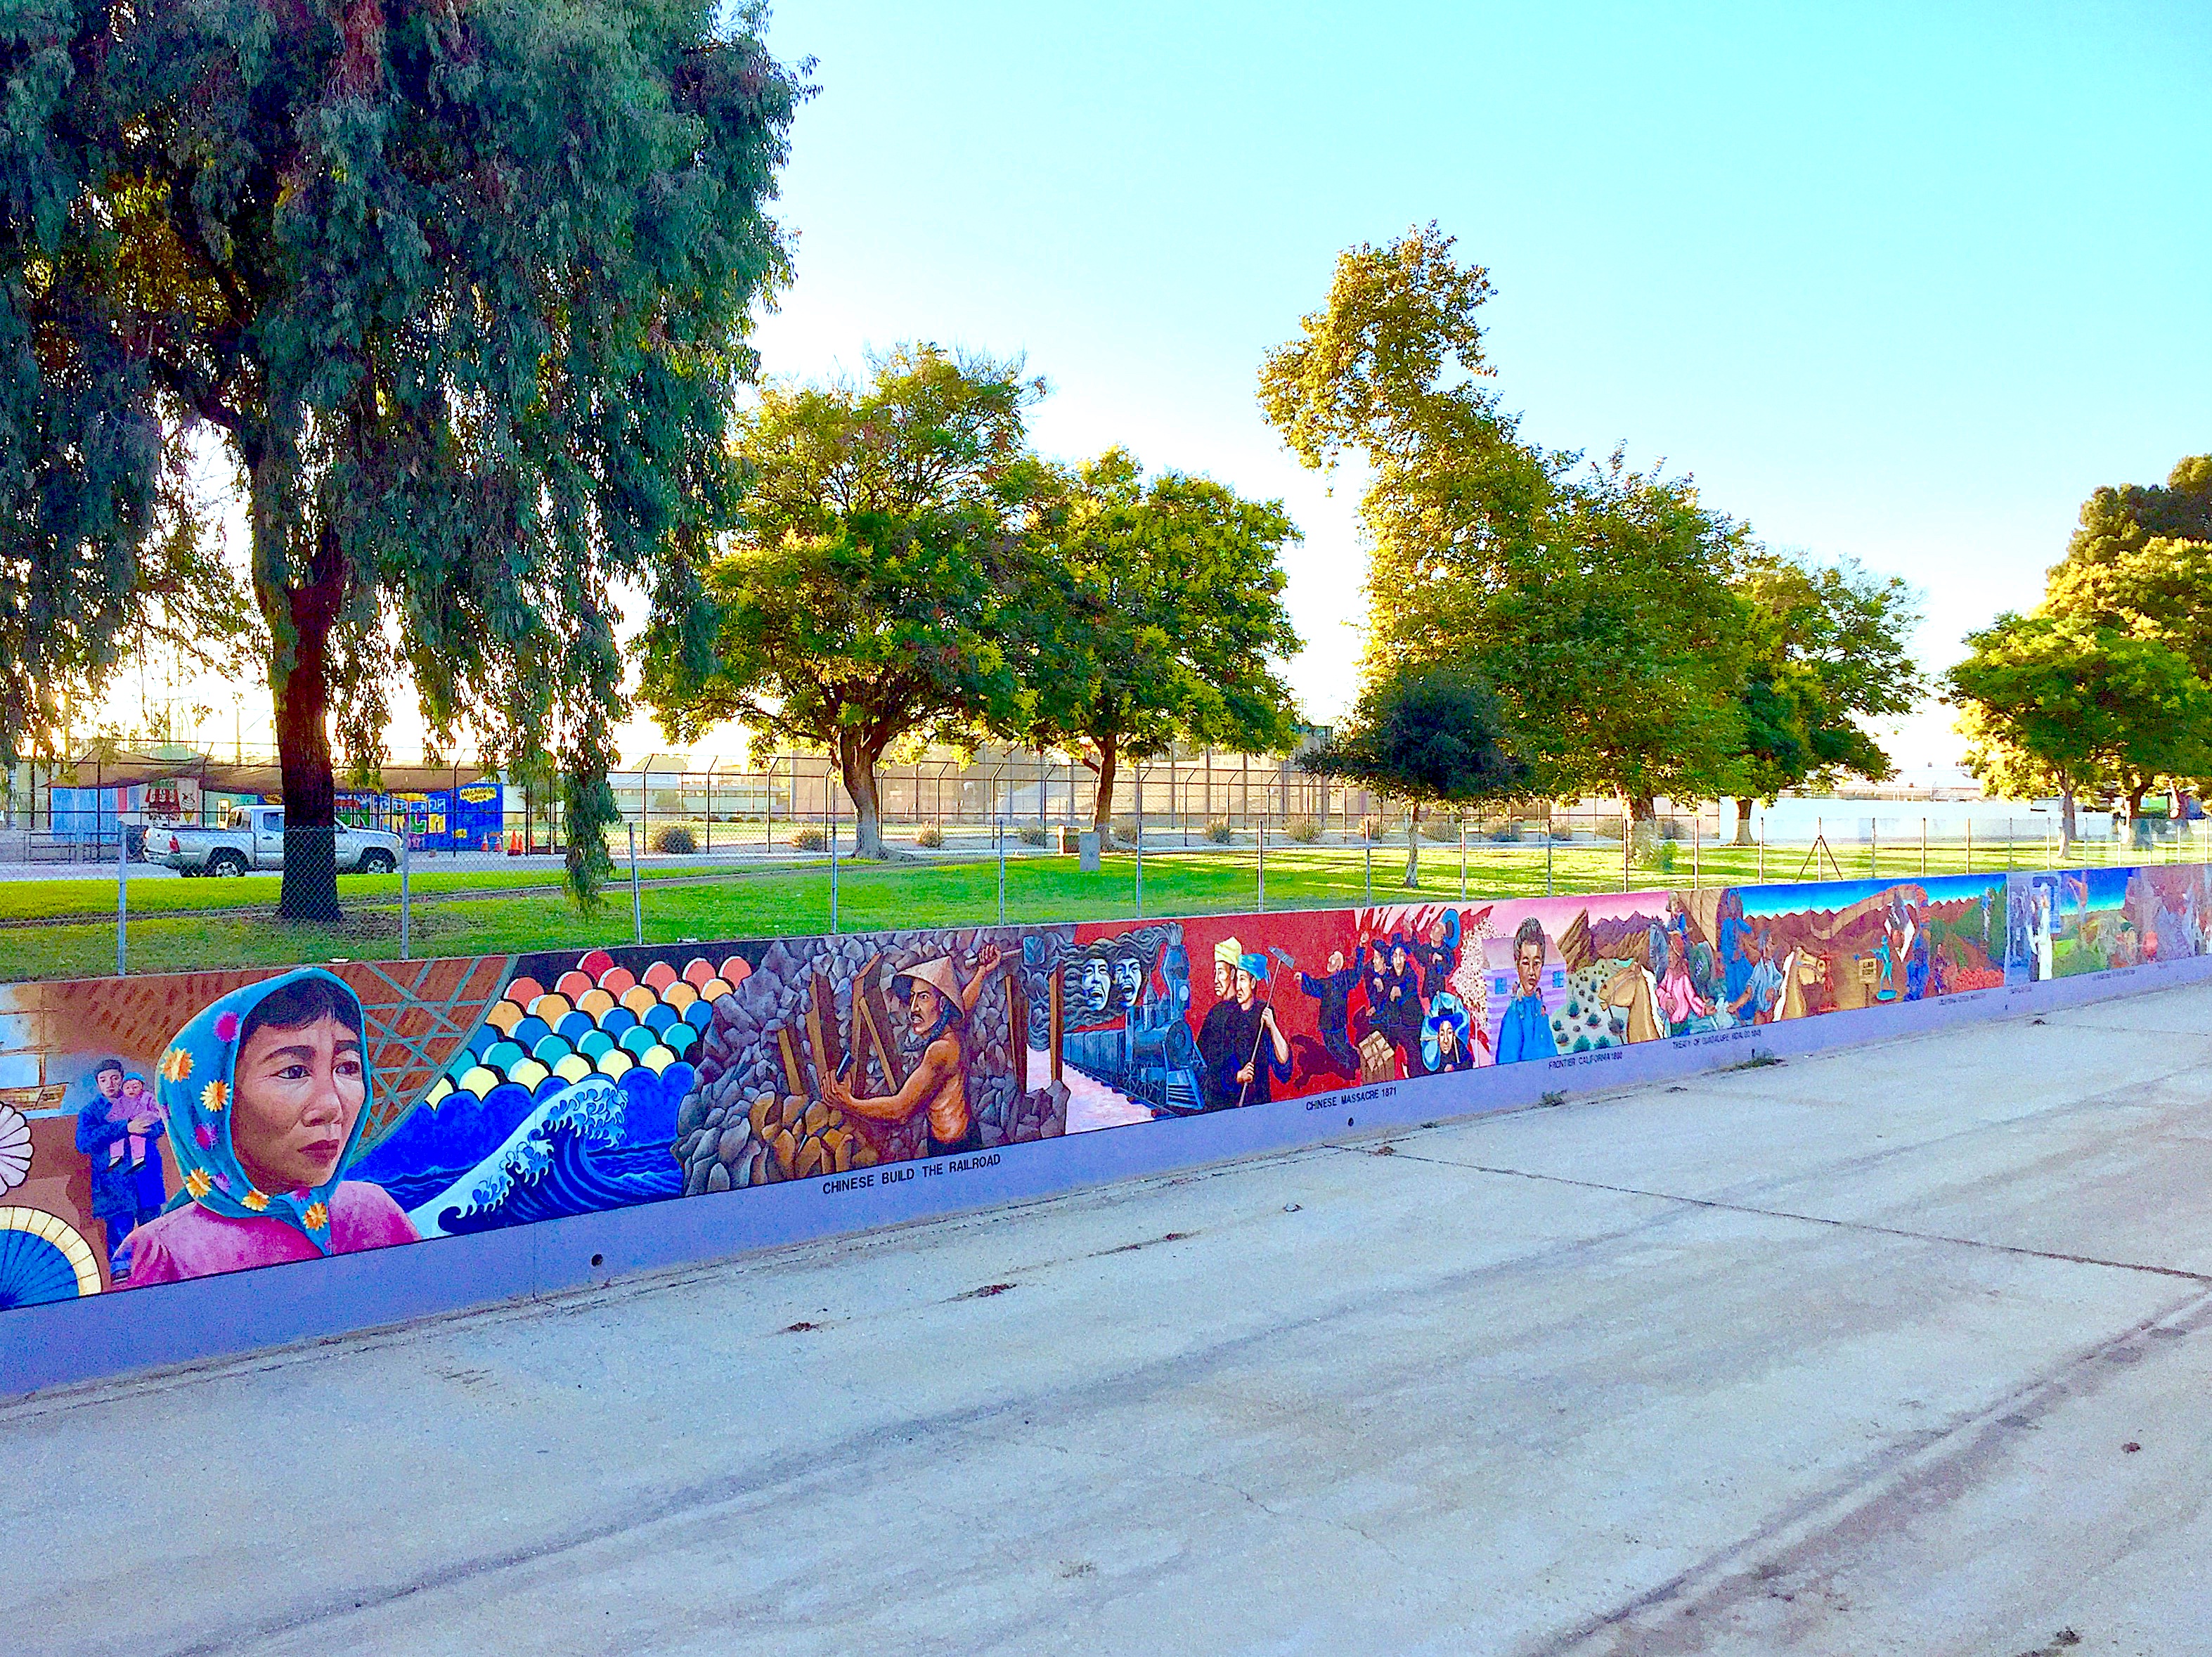 Piece of a colorful mural by Chicana artist Judy Baca